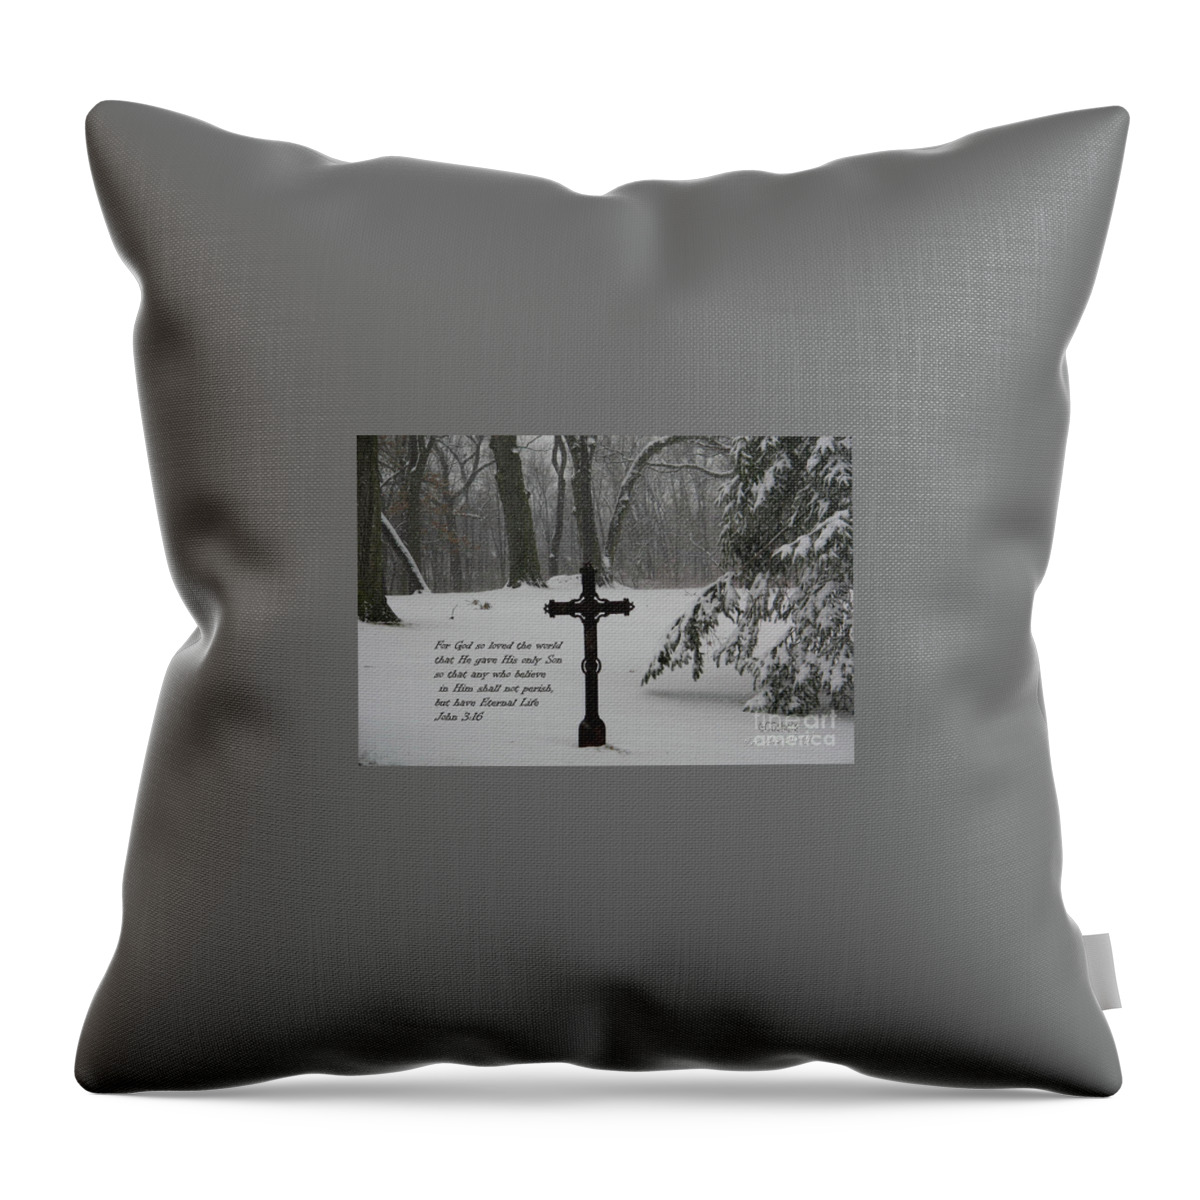  Throw Pillow featuring the mixed media Cross snow by Lori Tondini